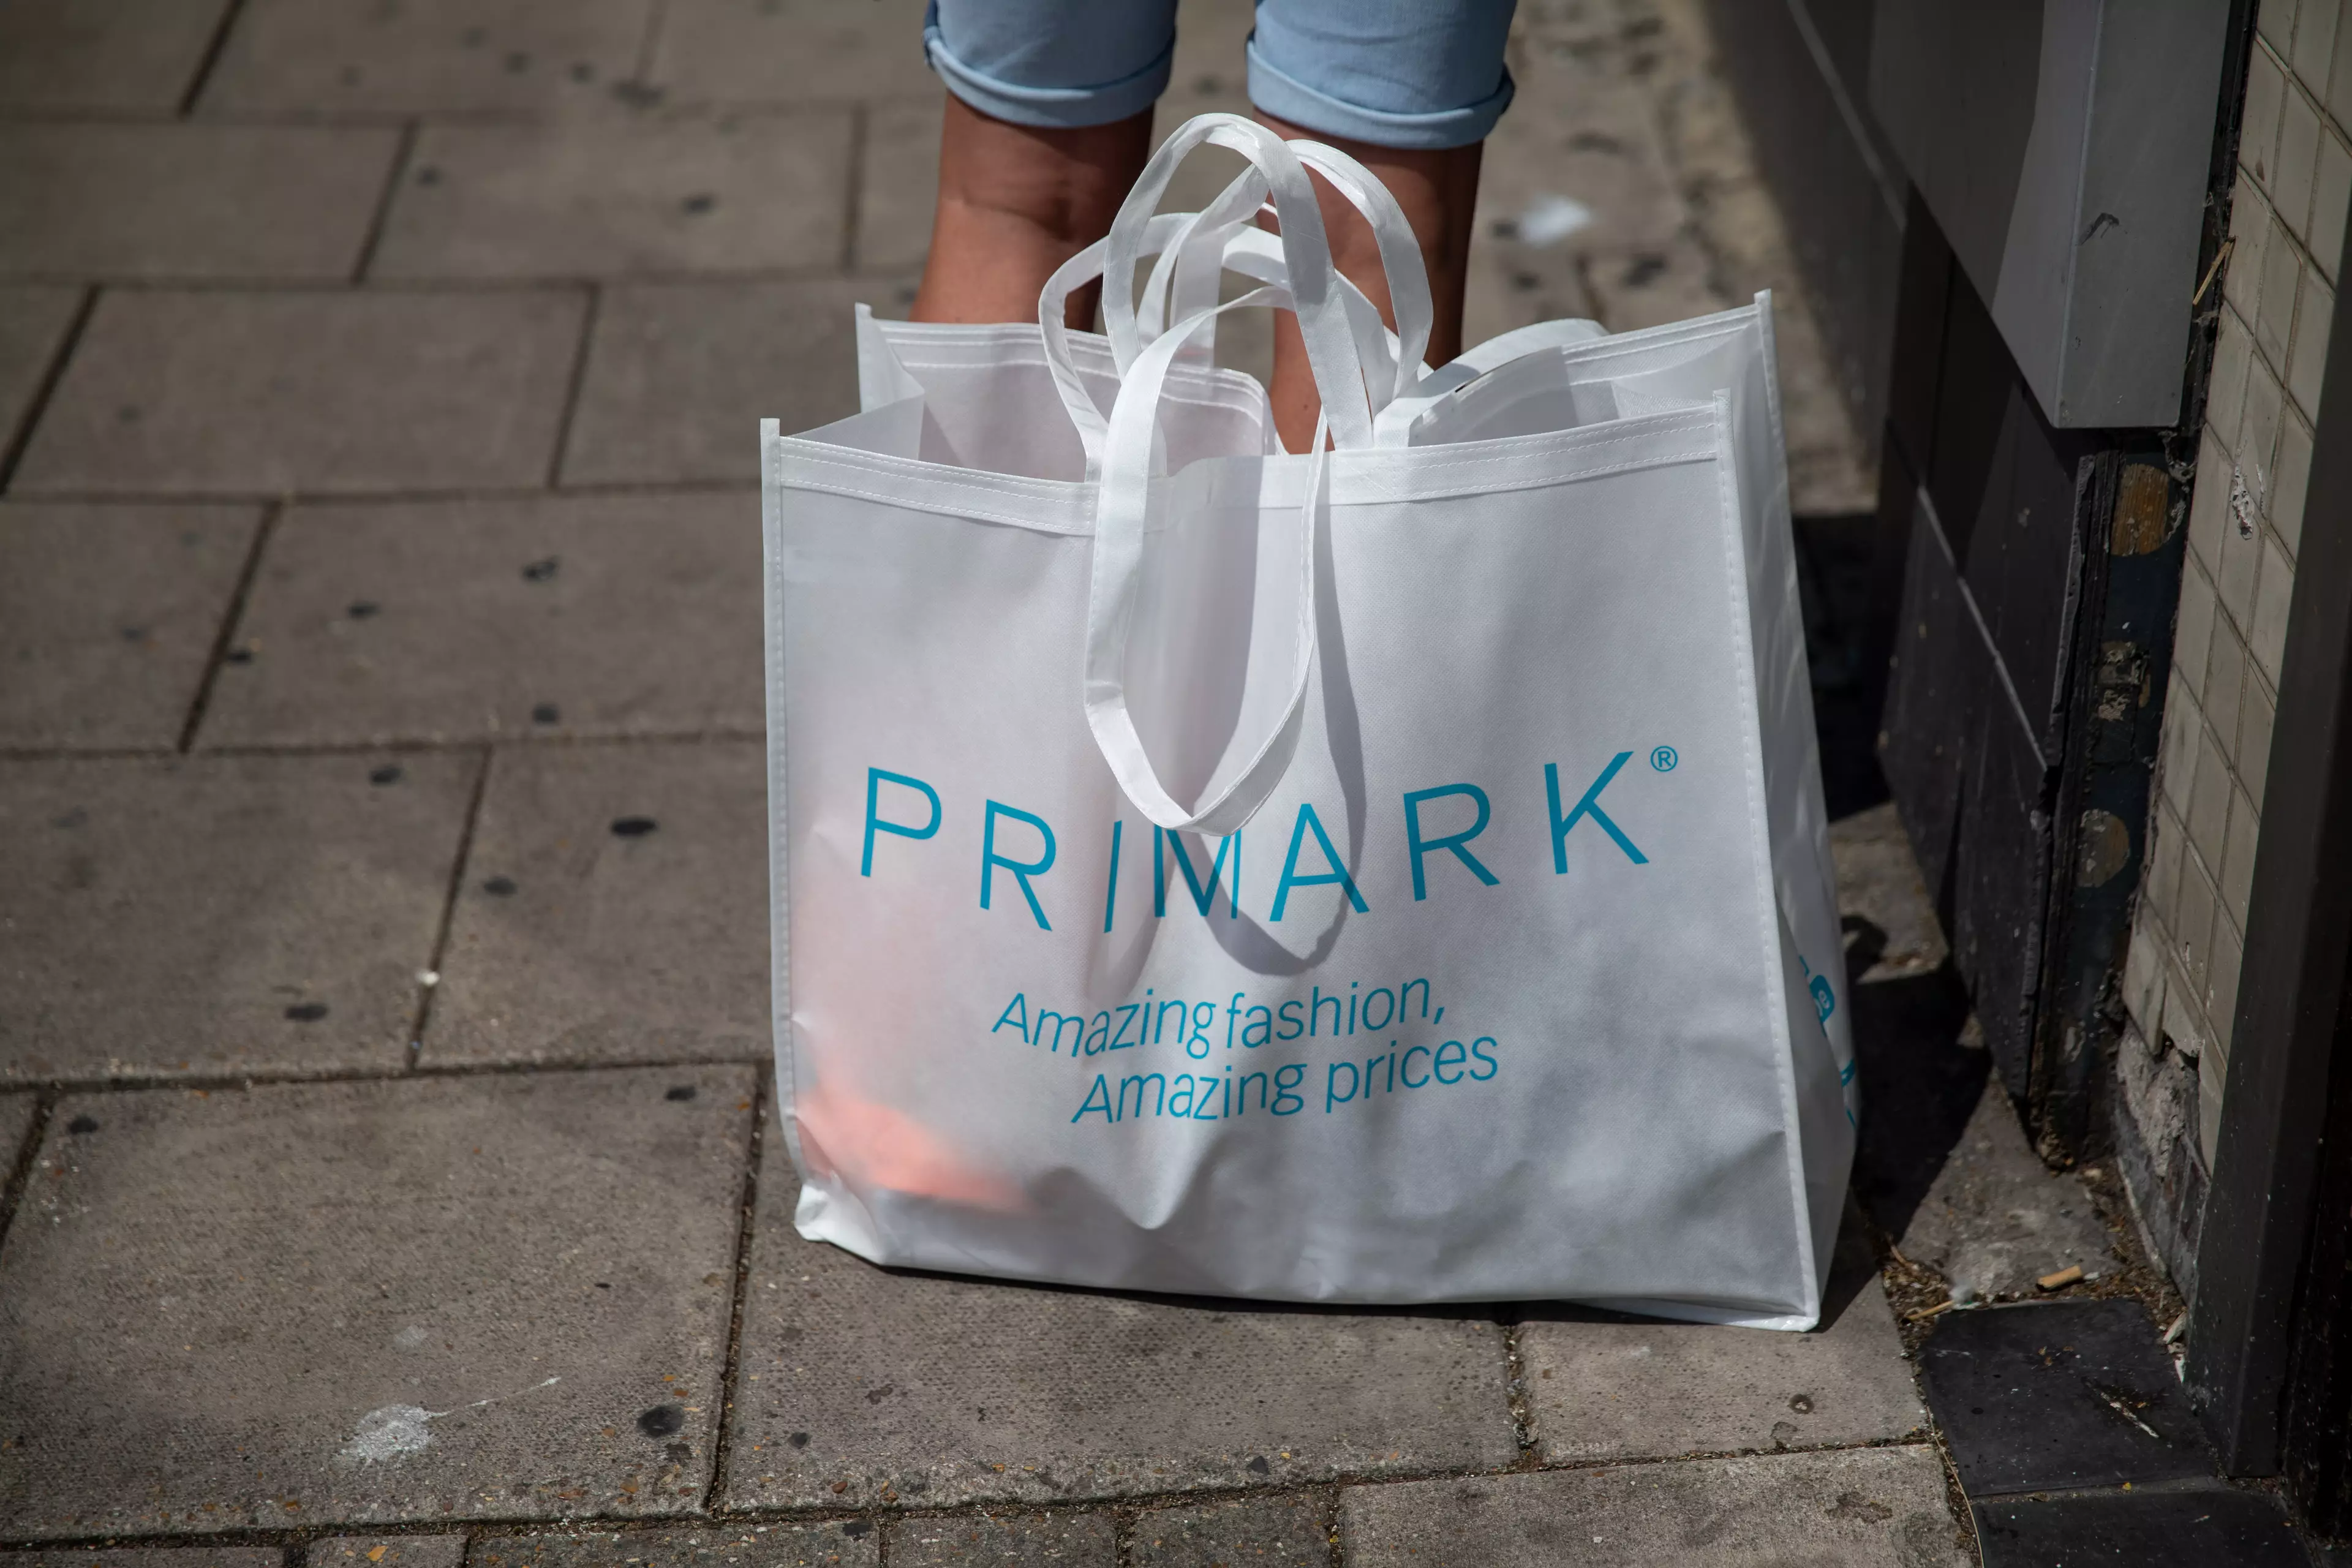 Primark will reopen its 153 stores in England on 12th April (